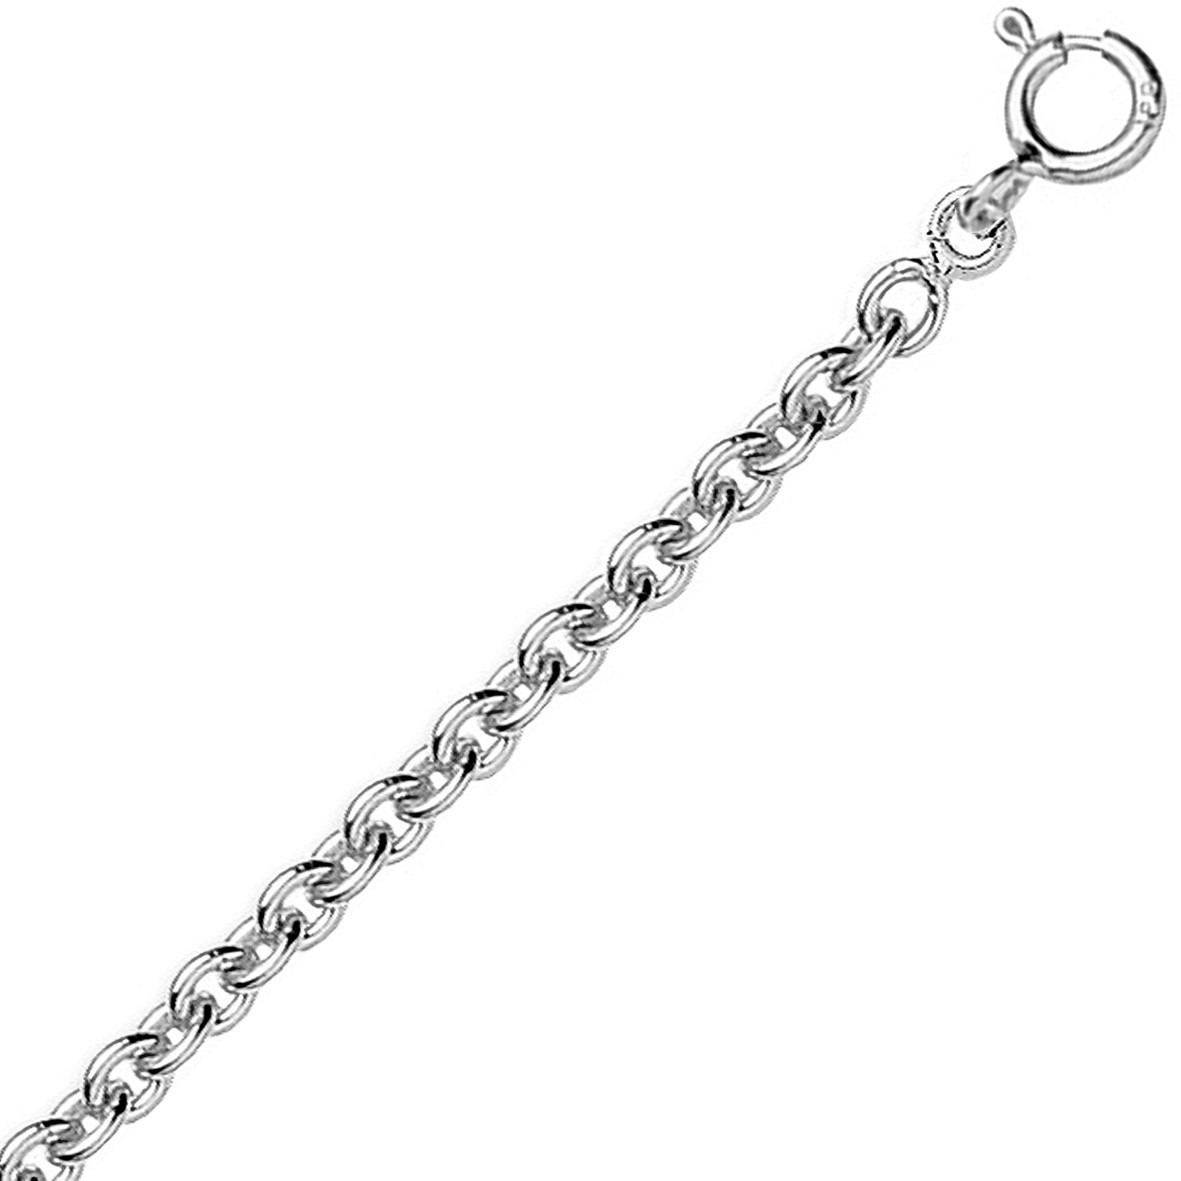 Chaine or blanc 18k maille forçat ronde 1,45mm